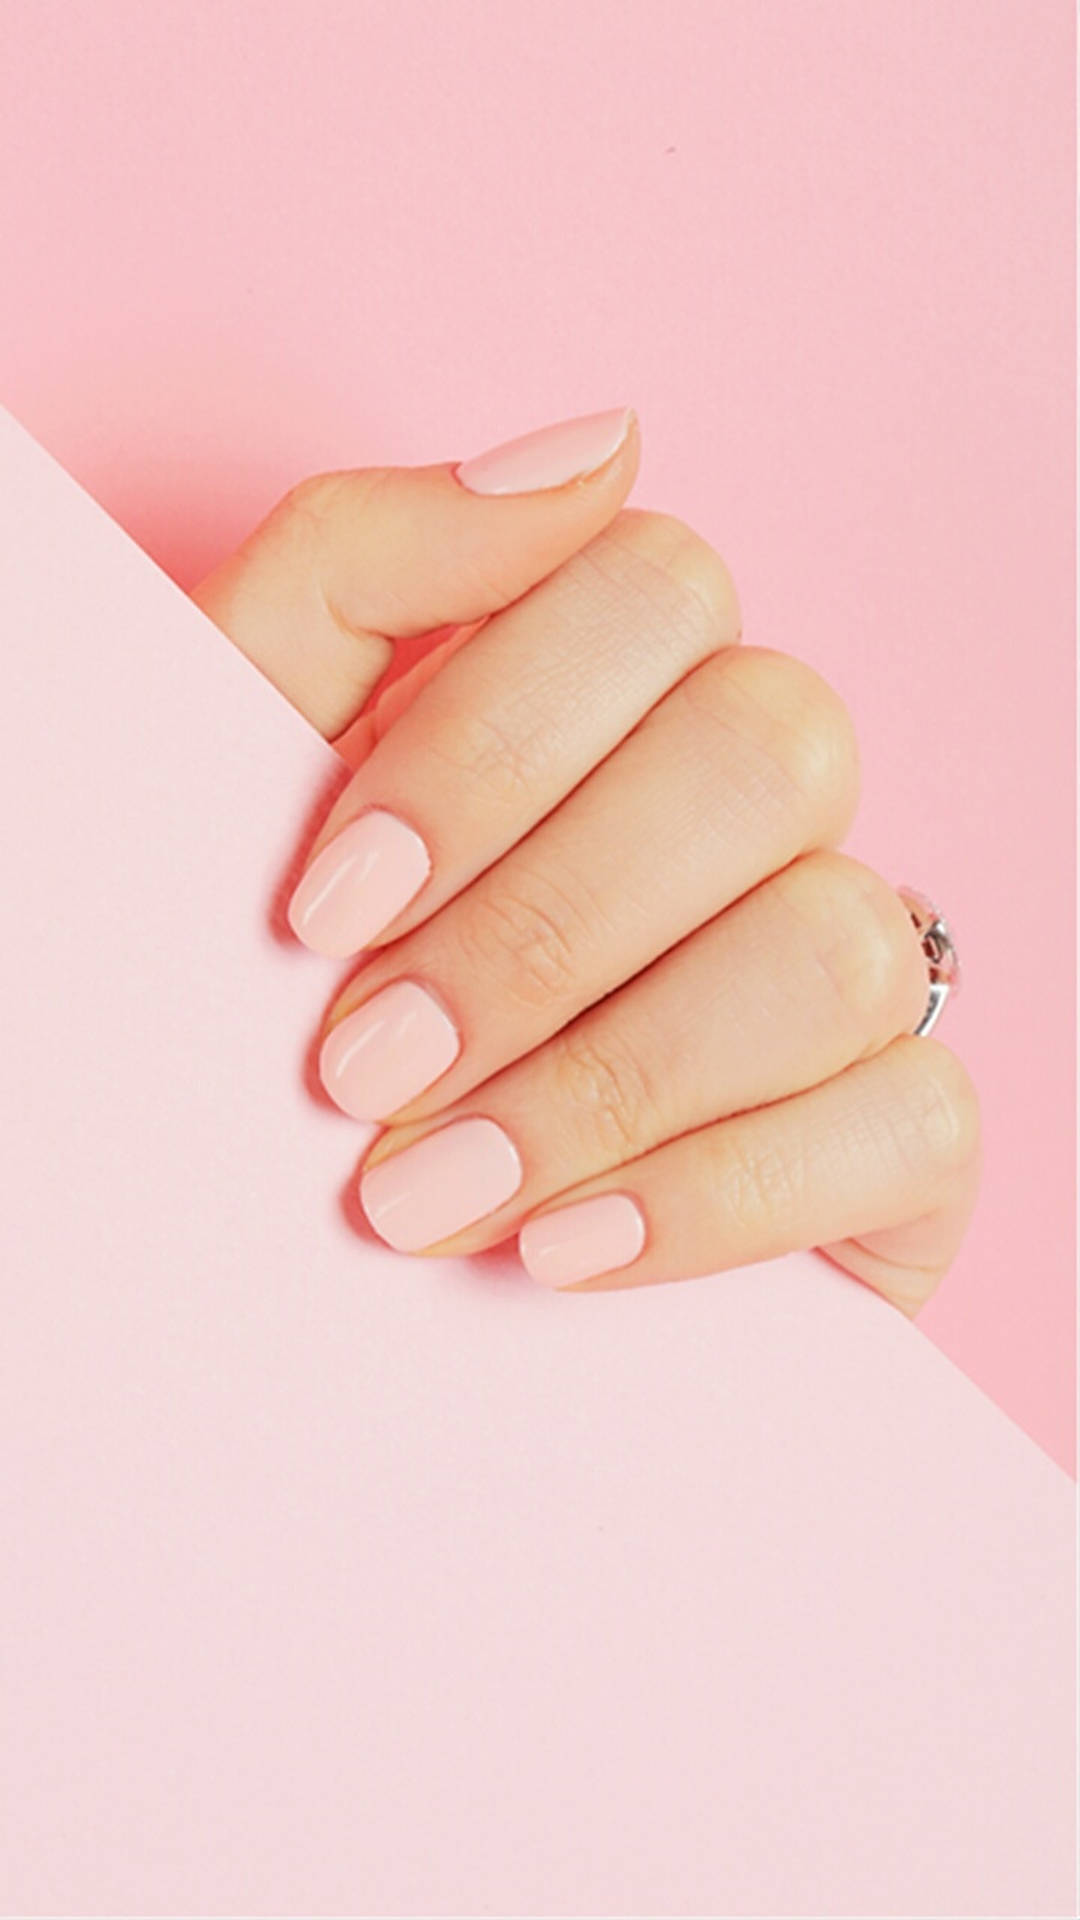 Aggregate 152+ pink aesthetic nails